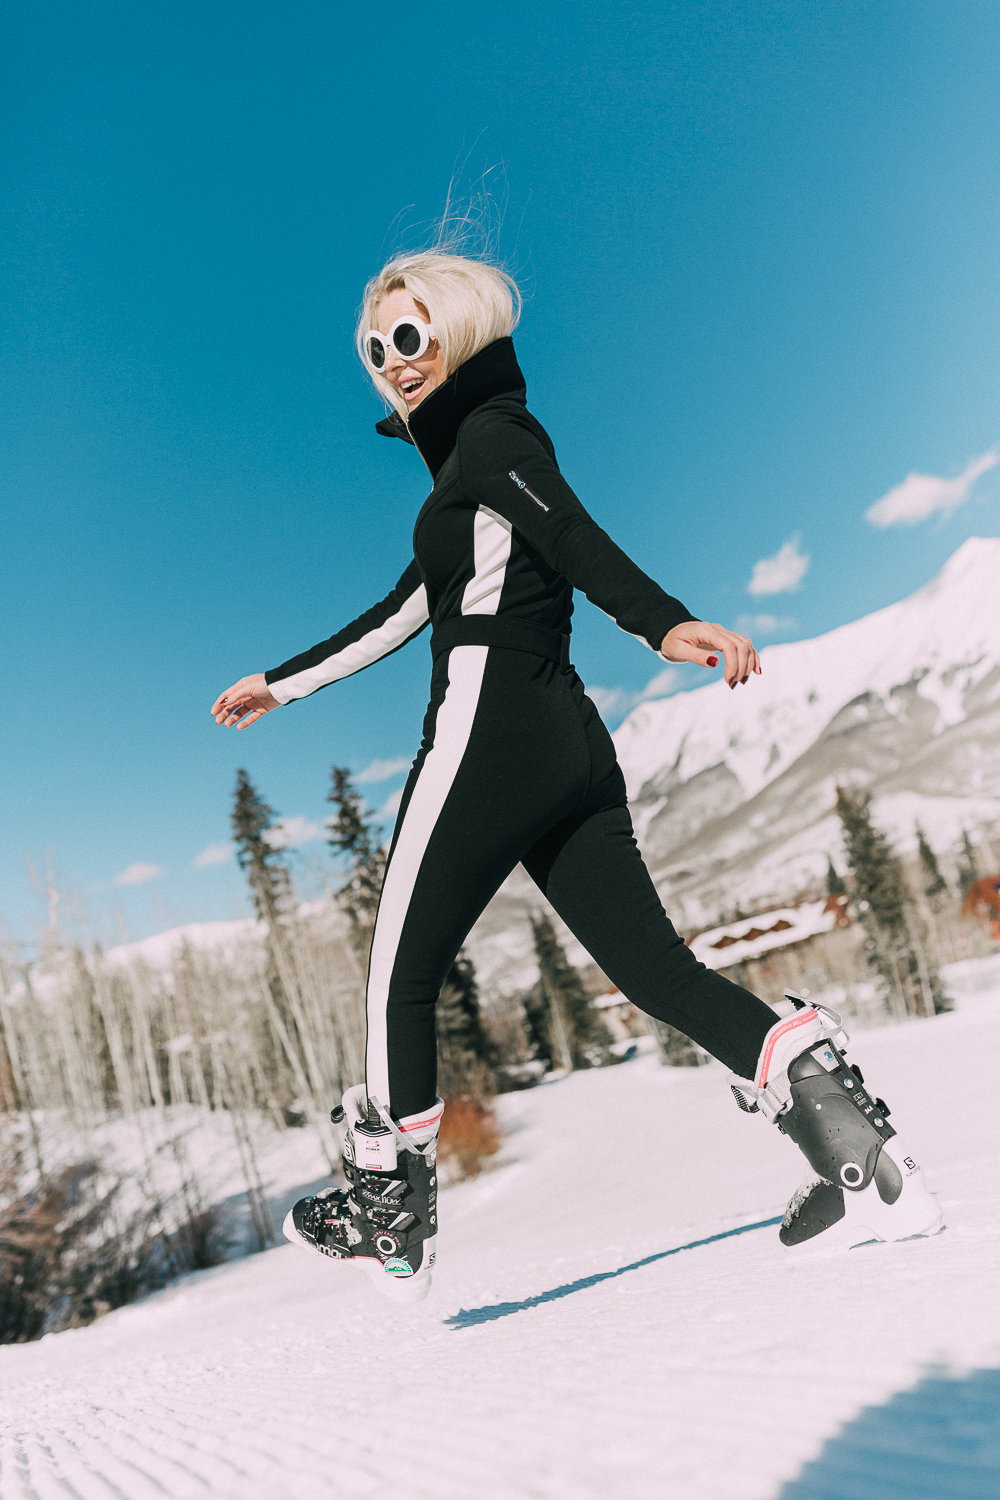 Ski Gear for women on eBay featuring a one-piece ski suit jumpsuit by Cordova on fashion blogger with blonde hair in snowy mountains, fashion blogger over 40 Erin Busbee of Busbeestyle.com